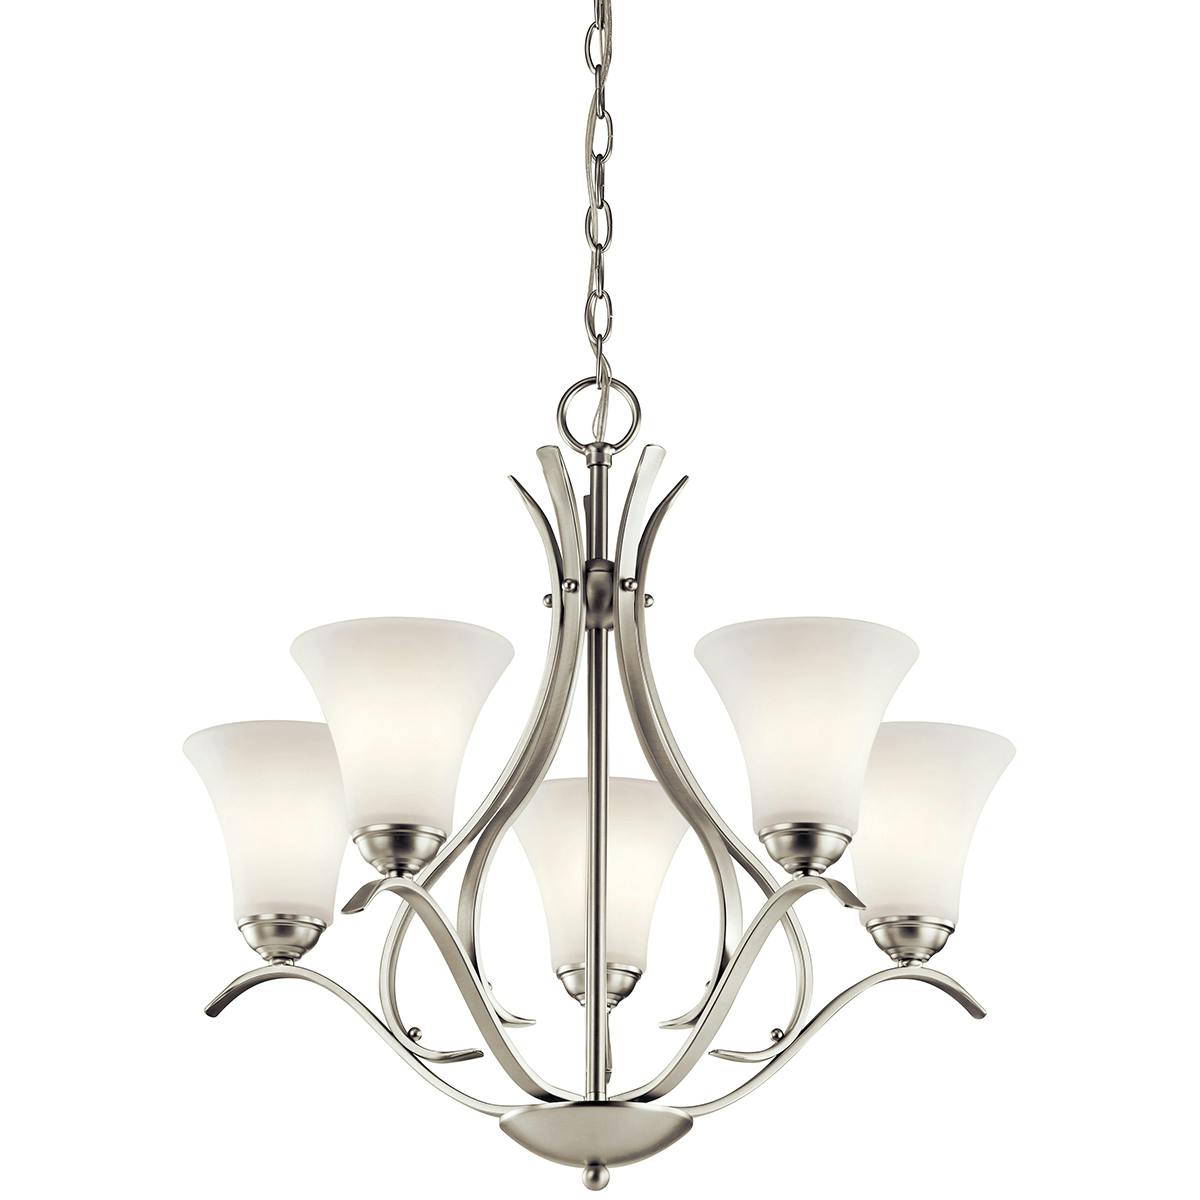 Keiran™ 5 Light Chandelier Brushed Nickel on a white background